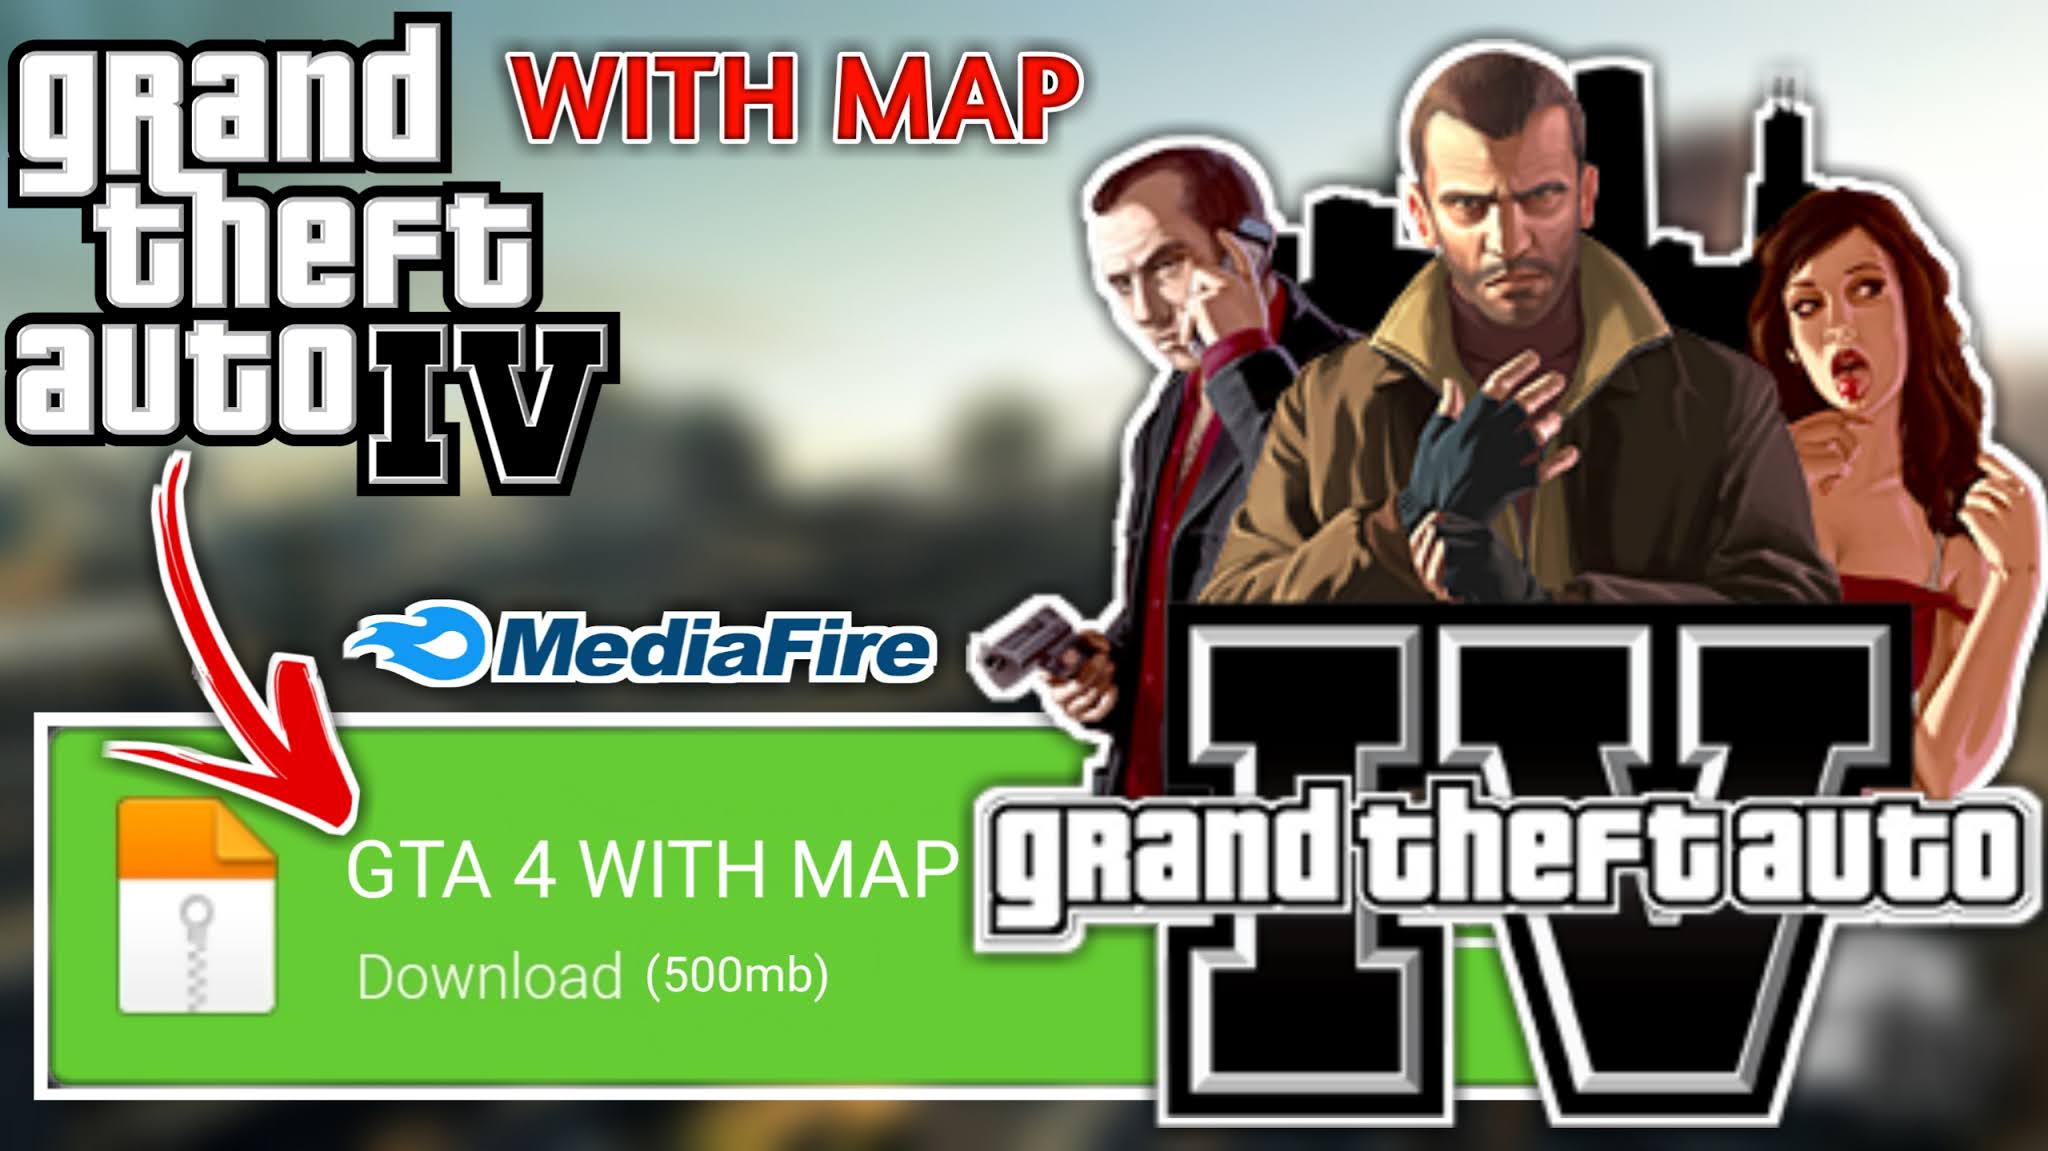 [500mb] Download Real GTA 4 Mobile Highly Compressed For